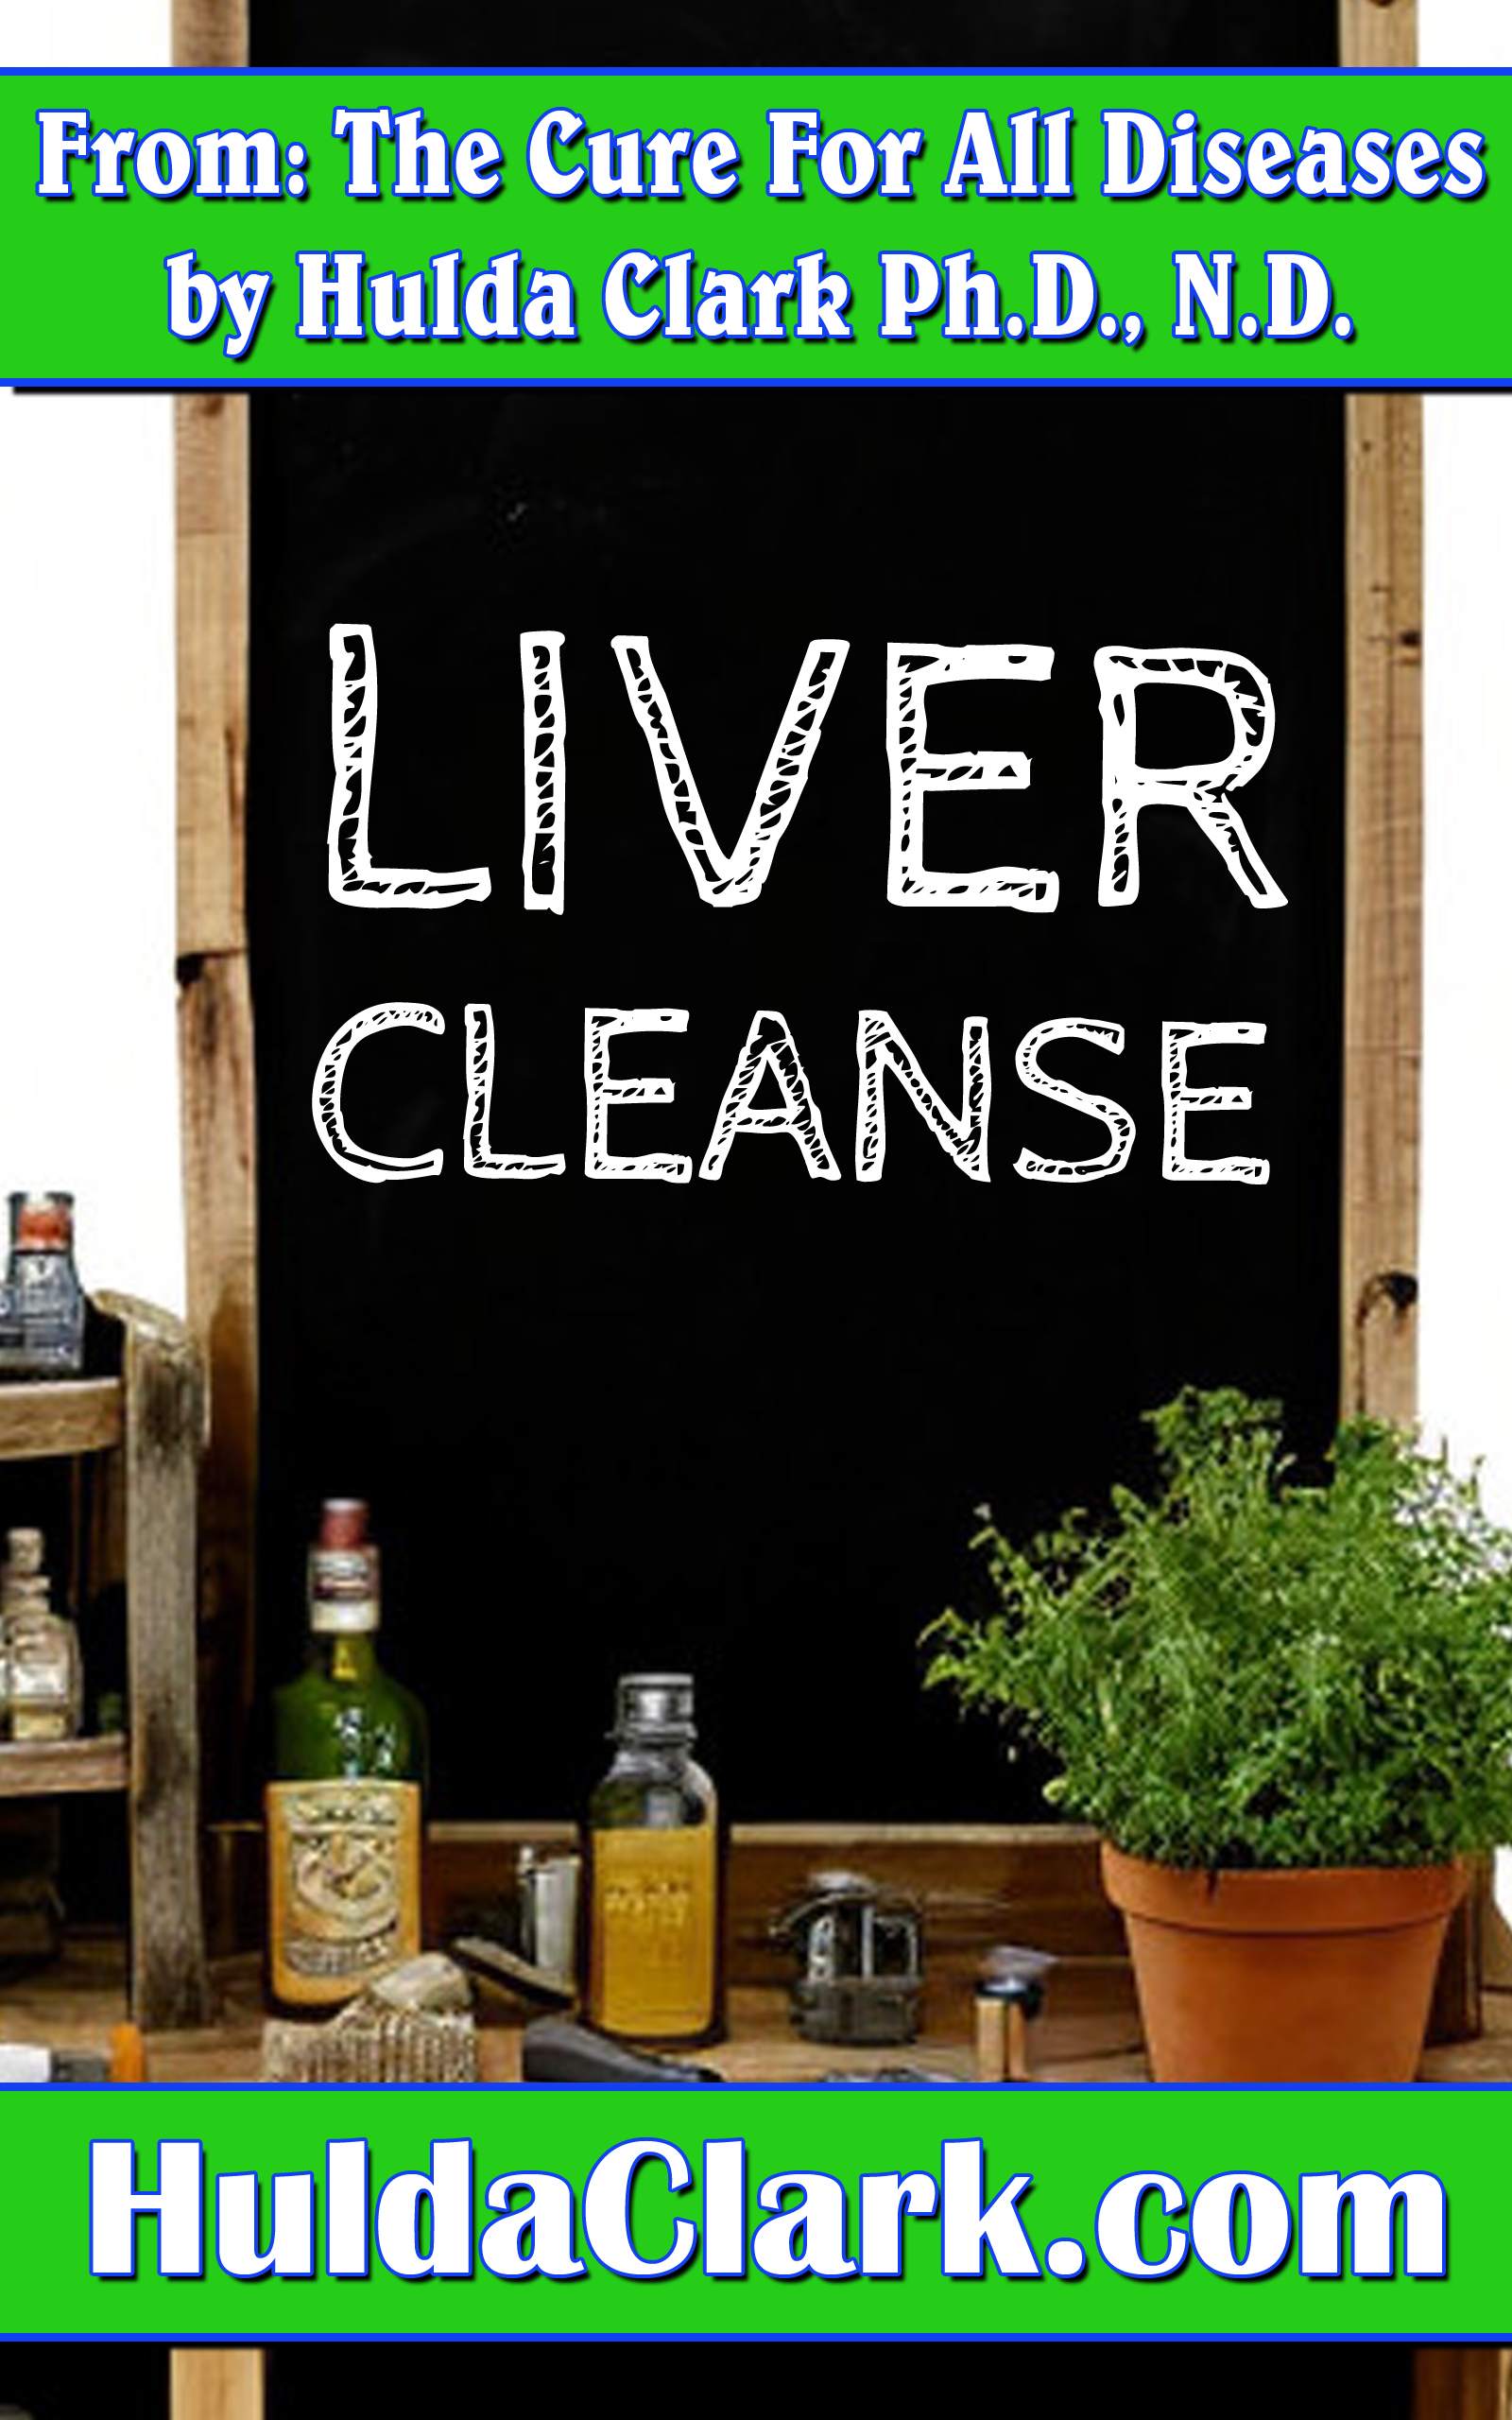 Liver Cleanse Ebook excerpt from The Cure for All Diseases by Hulda Clark